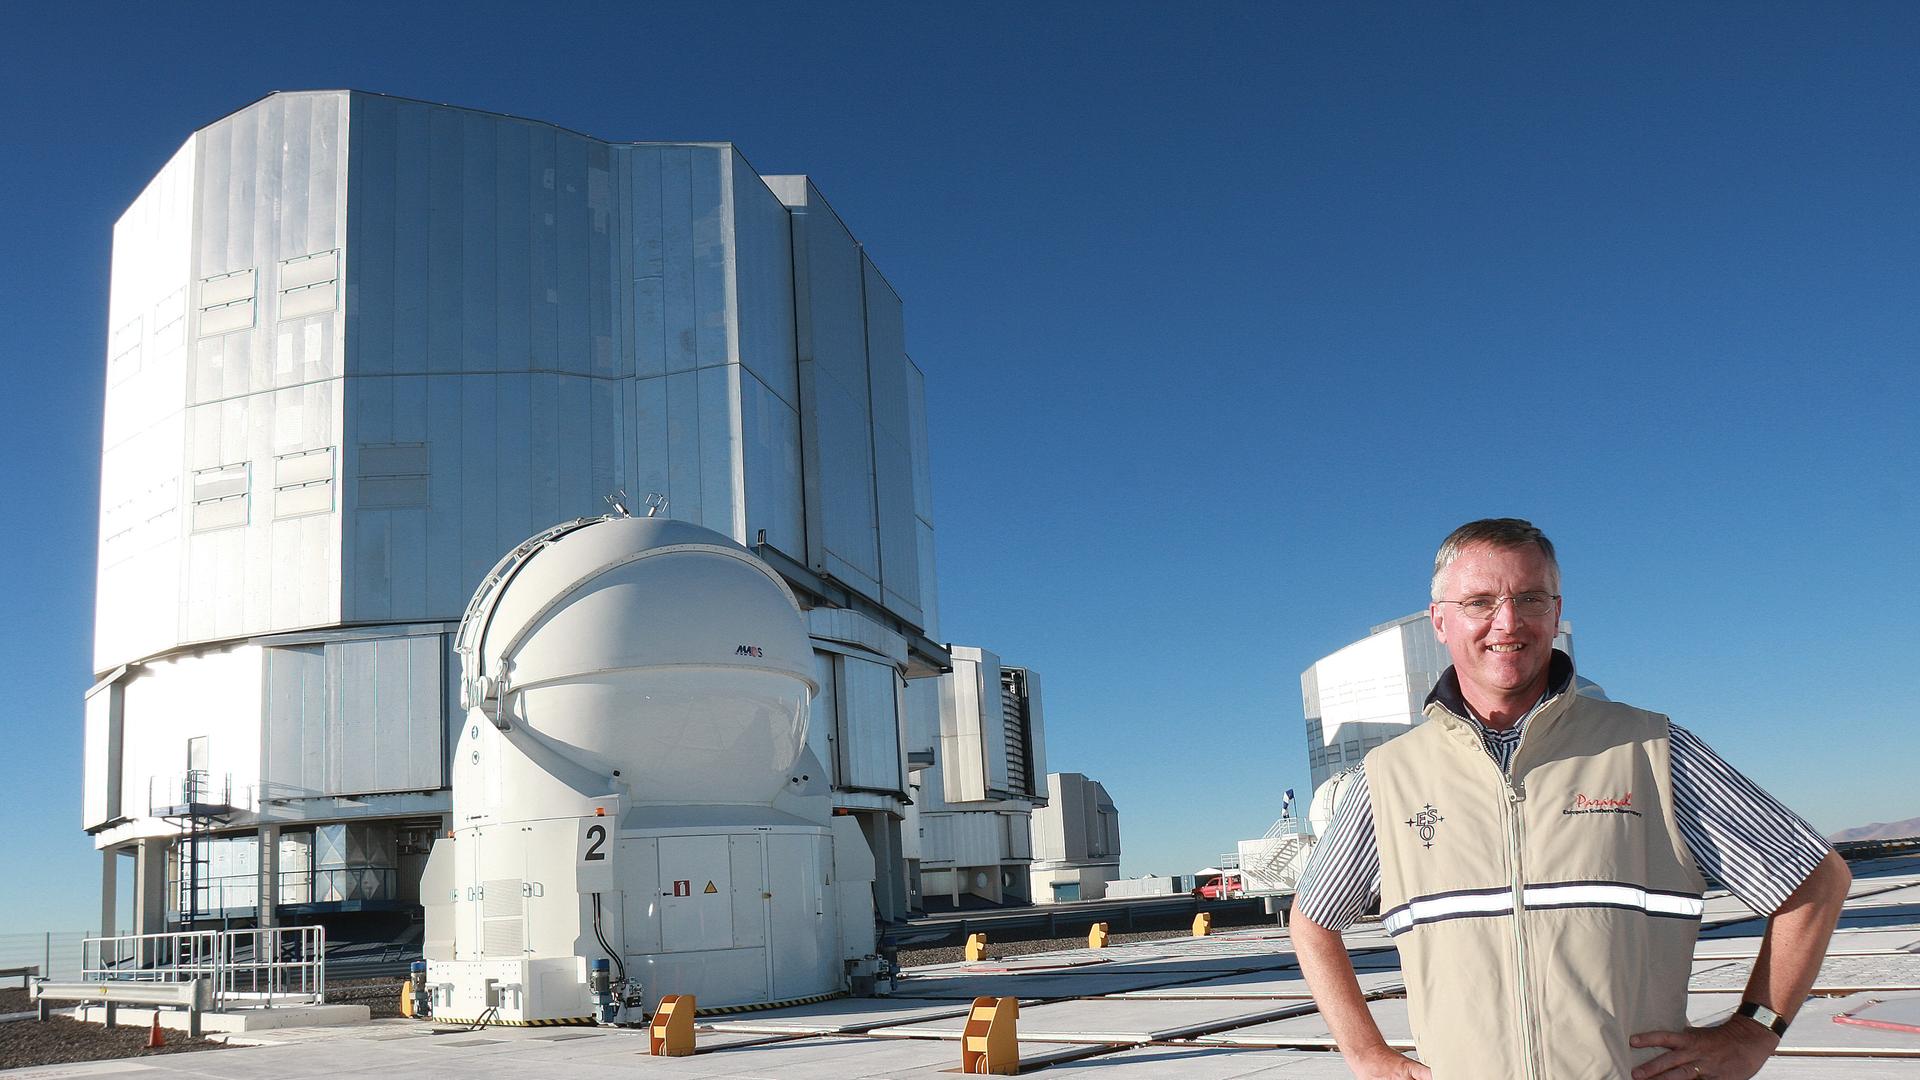 Professor Tim de Zeeuw, ESO Director General since September 2007, during a visit to the Paranal Observatory in August 2008. He stands on top of the Very Large Telescope platform in front of the enclosures of the four 8.2m unit telescopes ANTU, KUEYEN, MELIPAL, and YEPUN (from left to right). On the left the dome of AT2, one of the auxiliary telescopes, is seen.